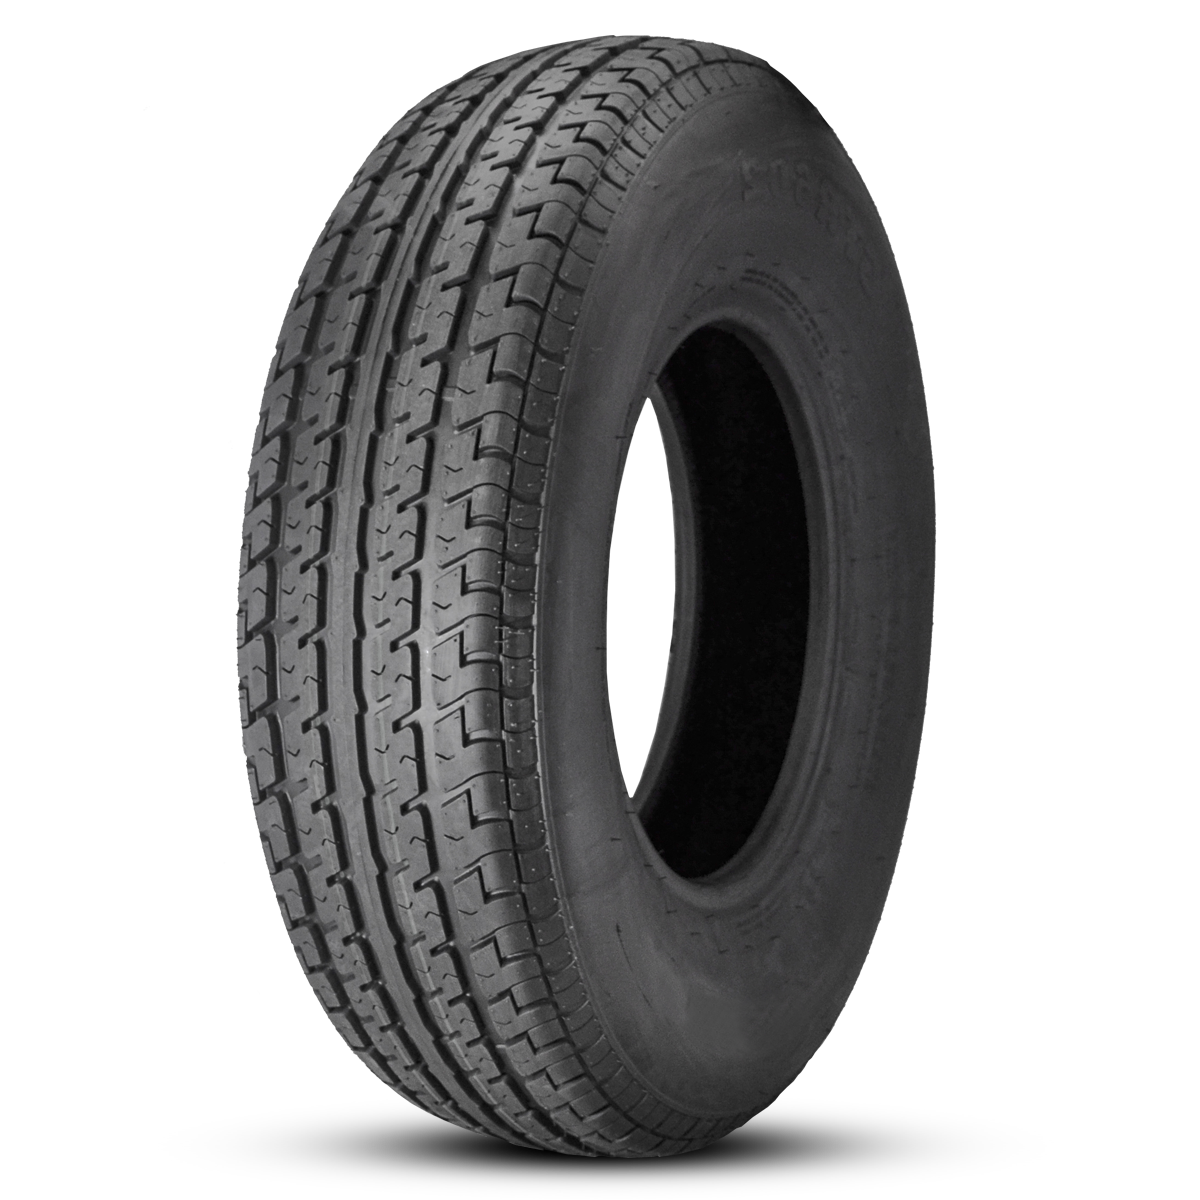 Shop New & Replacement Trailer Tires Online at HD Trailer Wheel Rims